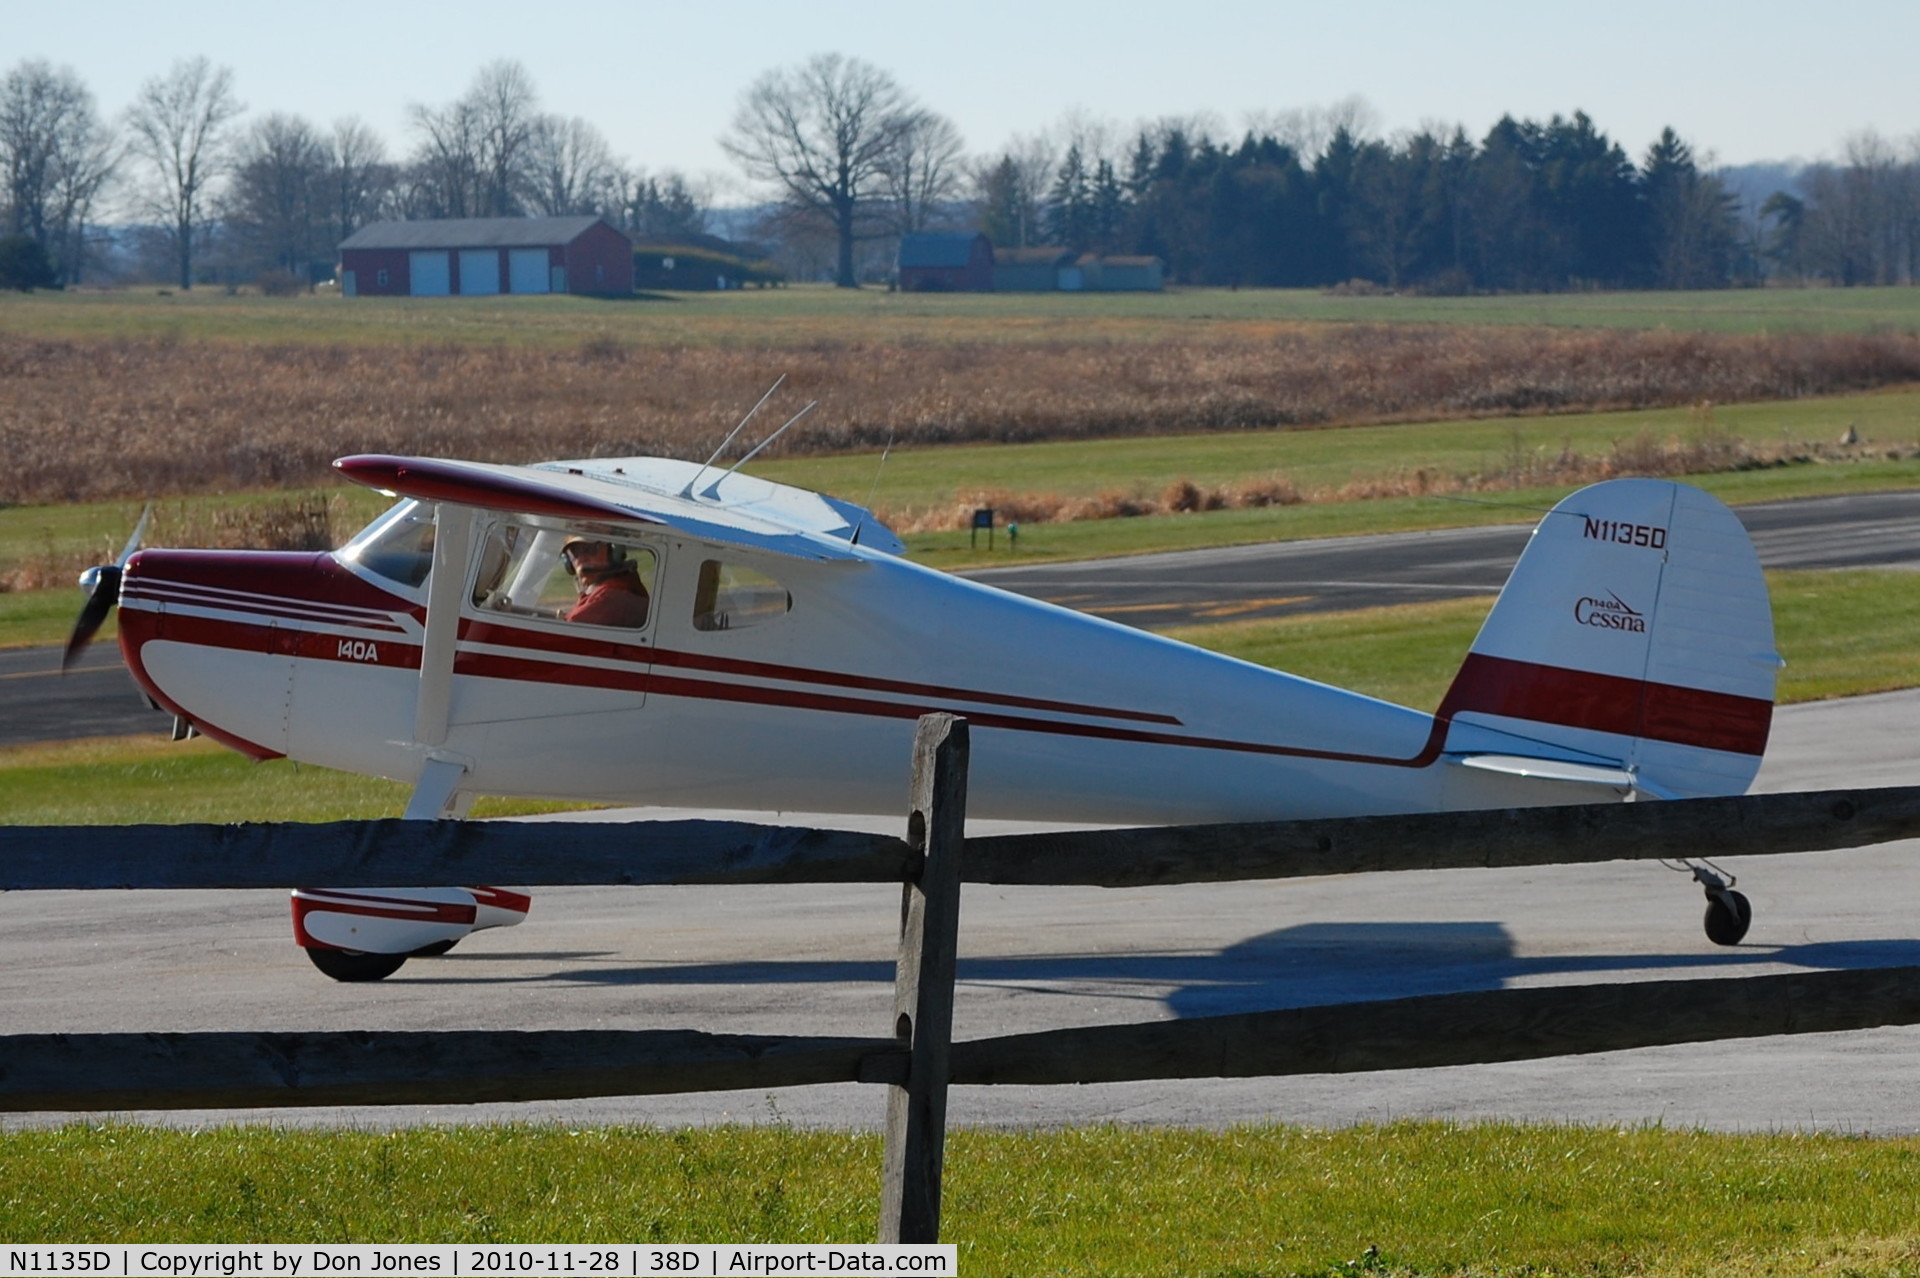 N1135D, 1951 Cessna 140A C/N 15698, Just landed at Salem Air Park in eastern Ohio.